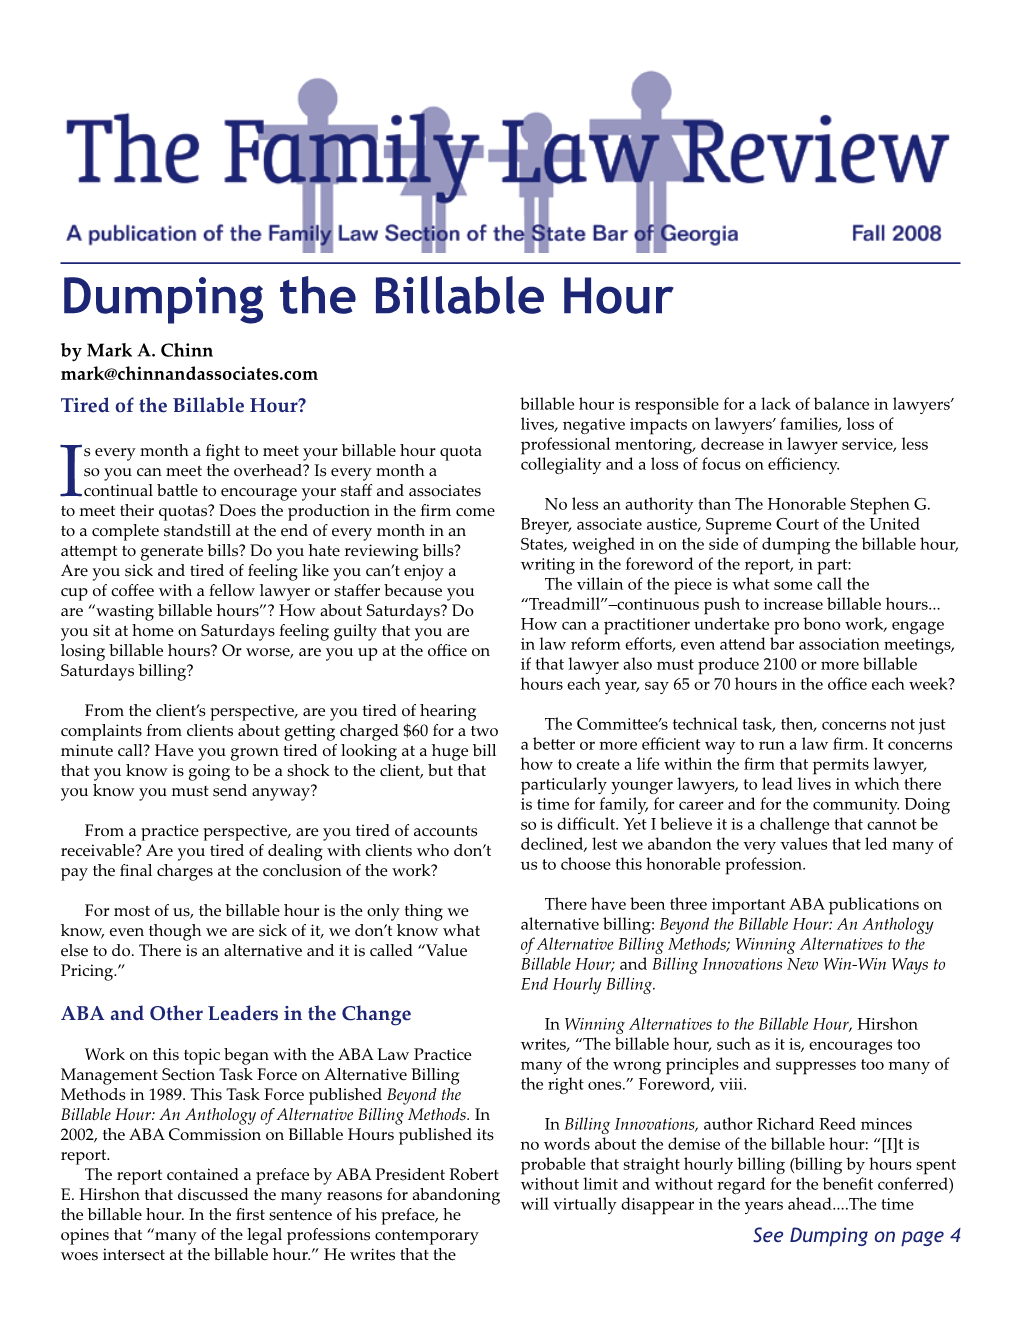 Dumping the Billable Hour by Mark A